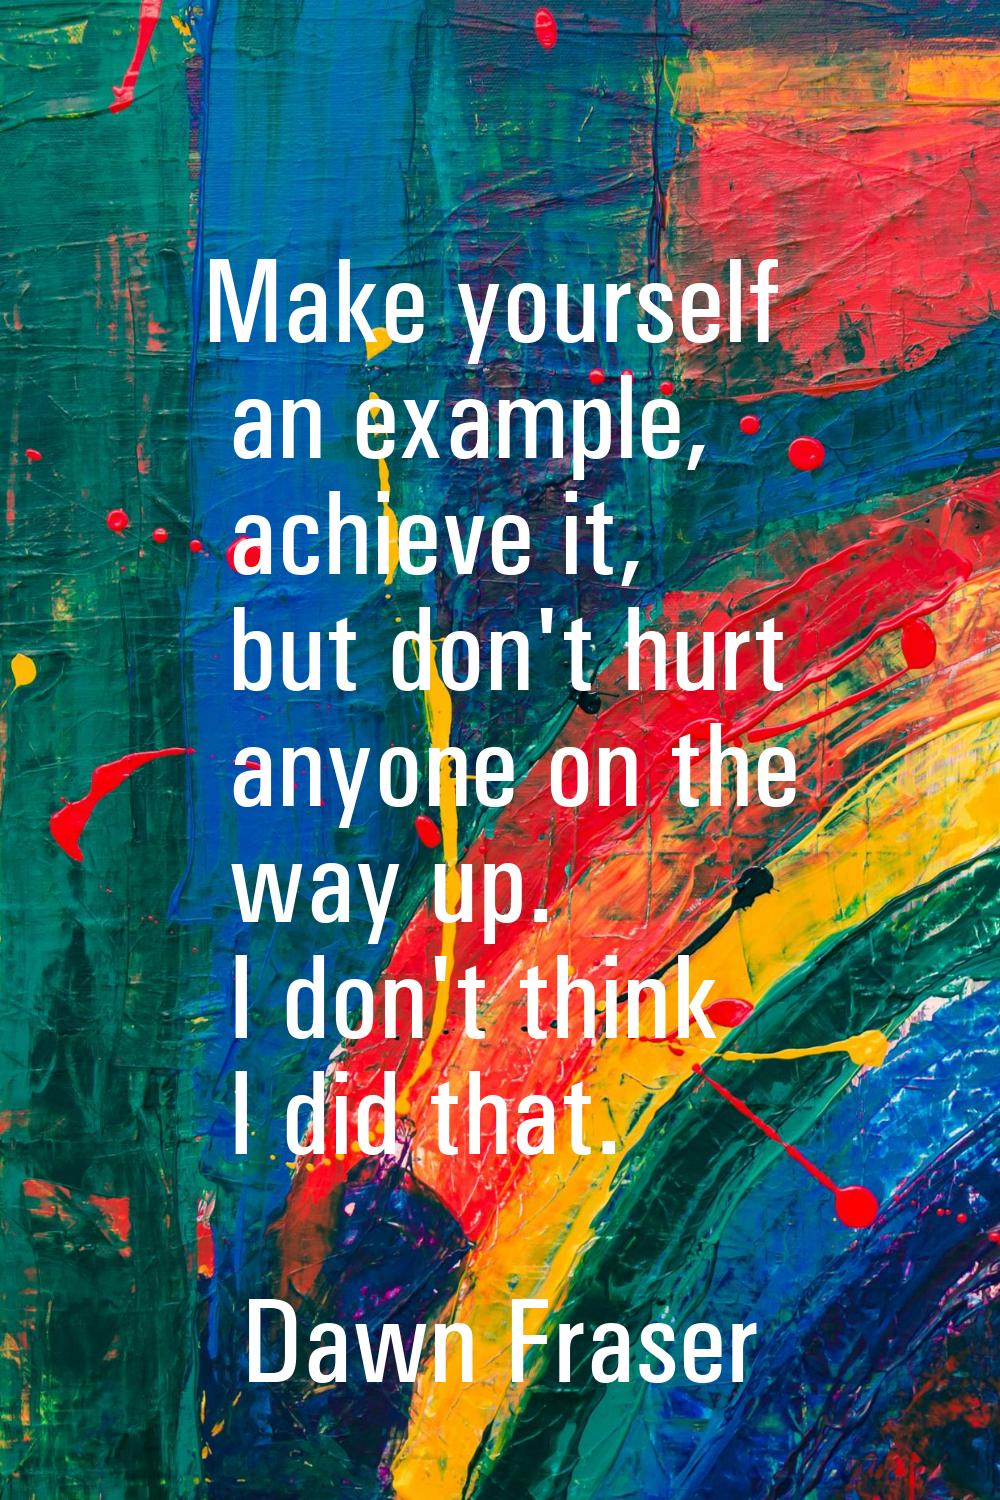 Make yourself an example, achieve it, but don't hurt anyone on the way up. I don't think I did that